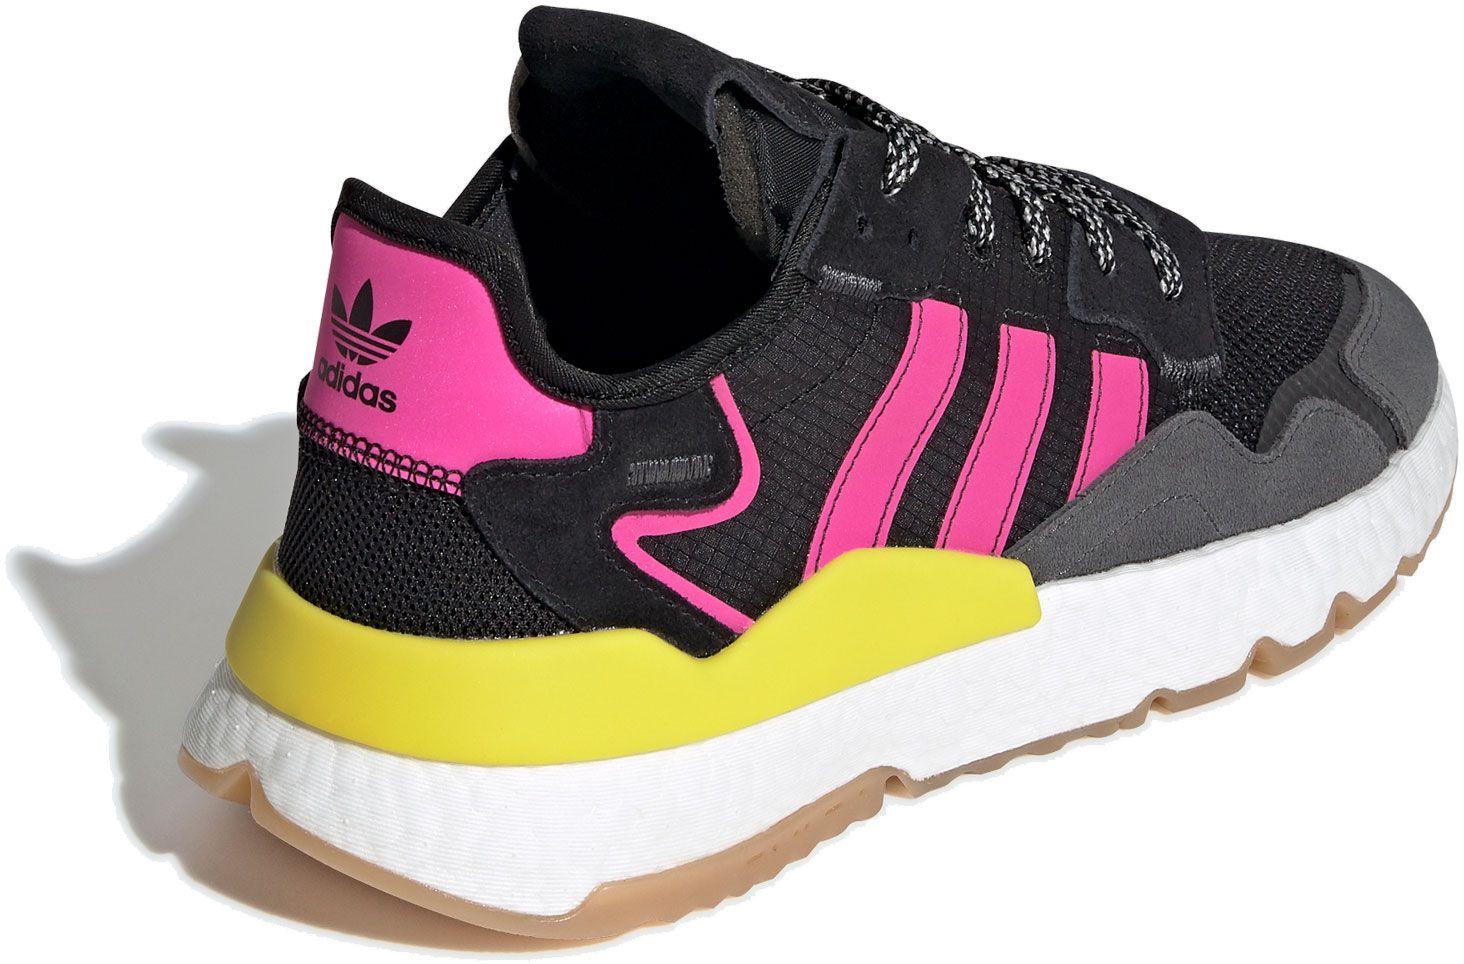 adidas Lace Originals Nite Jogger Shoes in Black/Pink